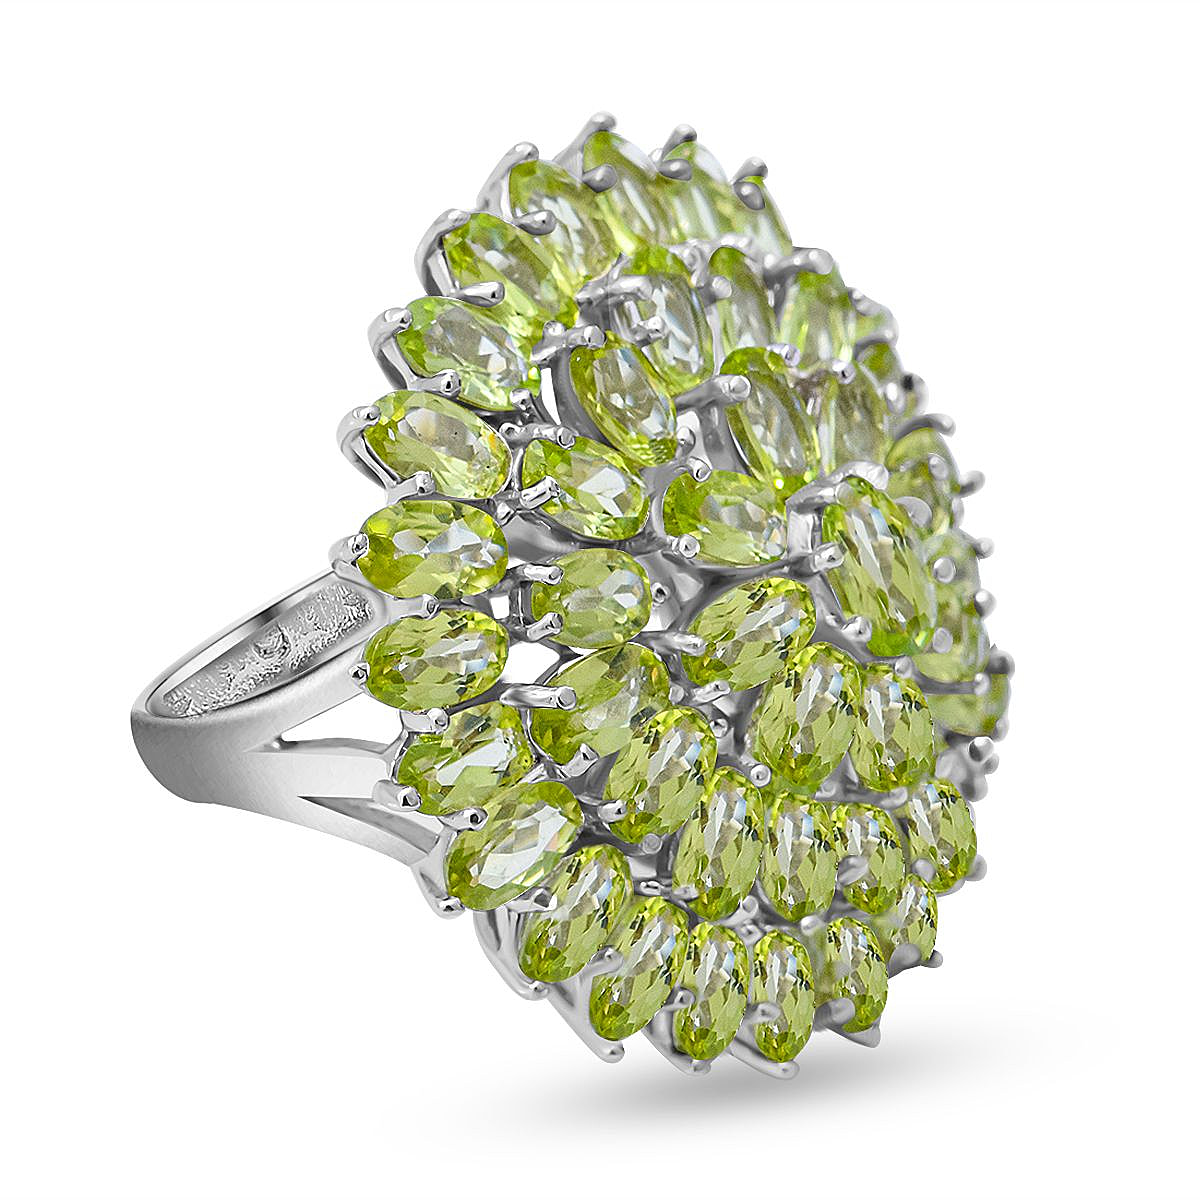 Natural Hebei Peridot Cluster Ring in Rhodium Overlay Sterling Silver 12.47 Ct, Silver Wt. 8.20 Gms.